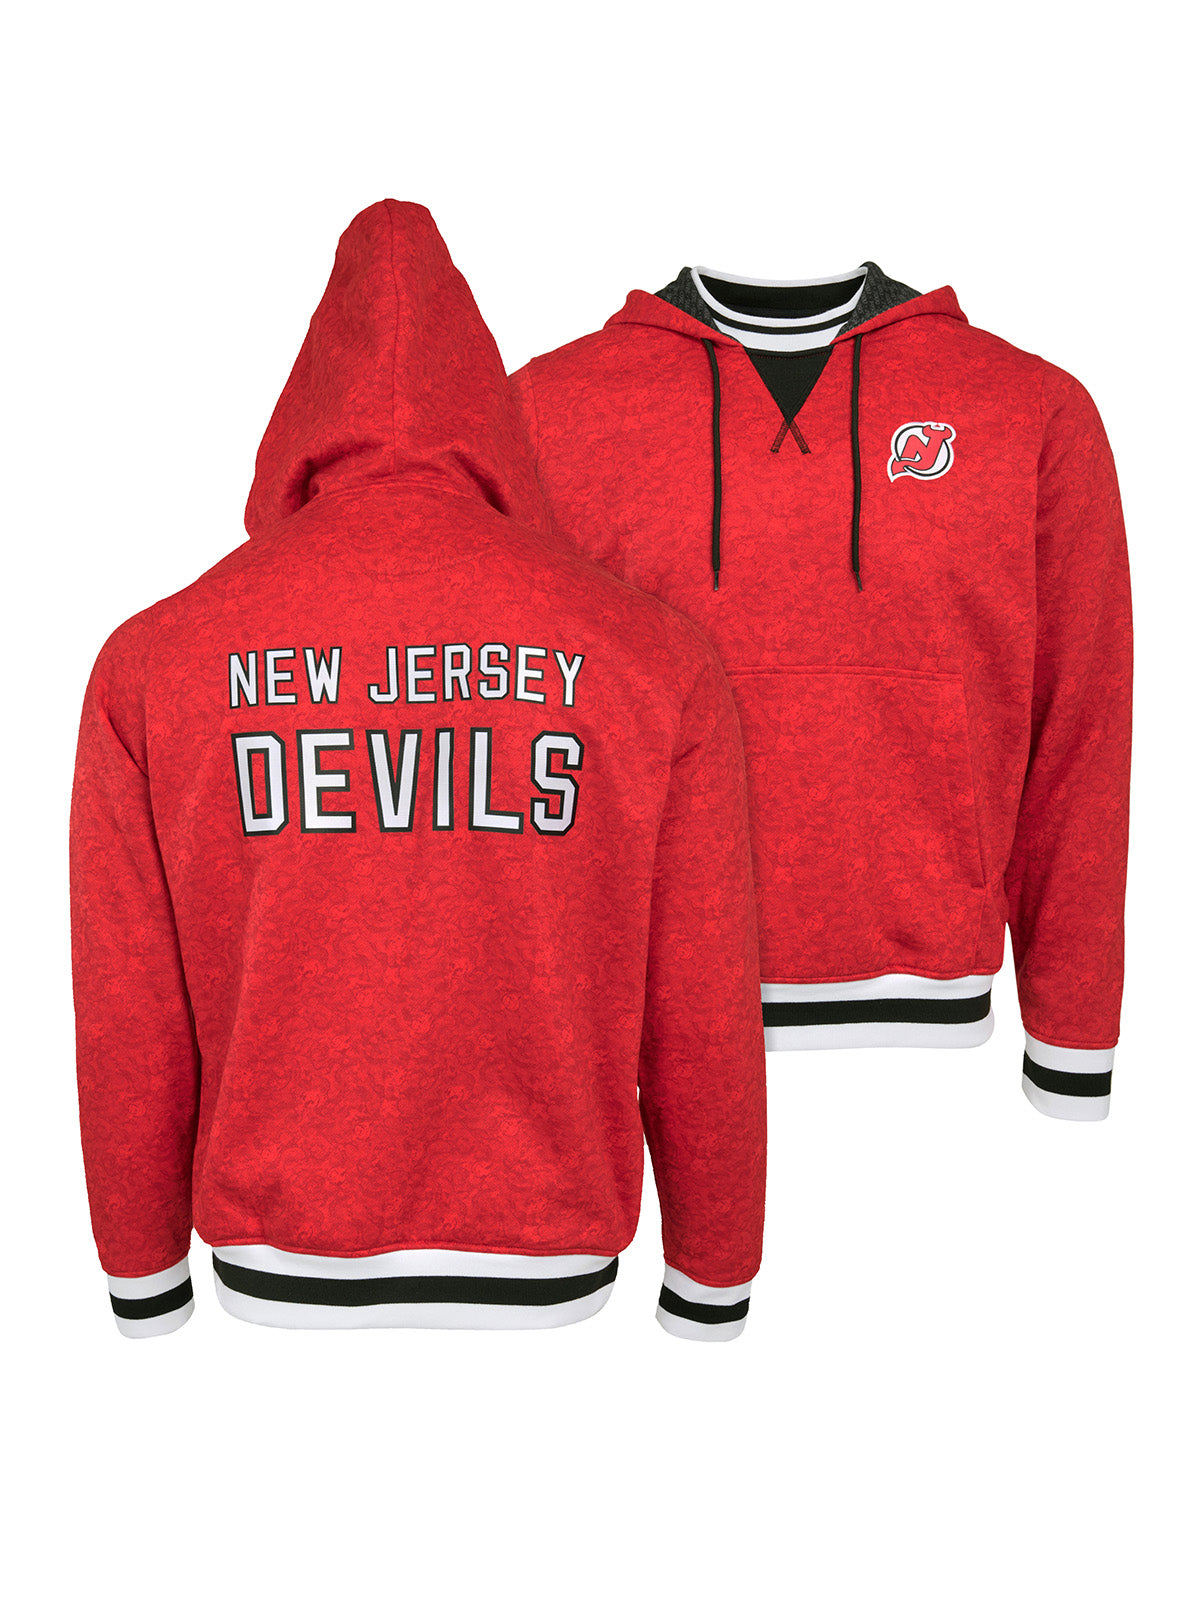 New Jersey Devils Hoodie - Show your team spirit, with the iconic team logo patch on the front and back, and proudly display your New Jersey Devils support in their team colors with this NHL hockey hoodie.